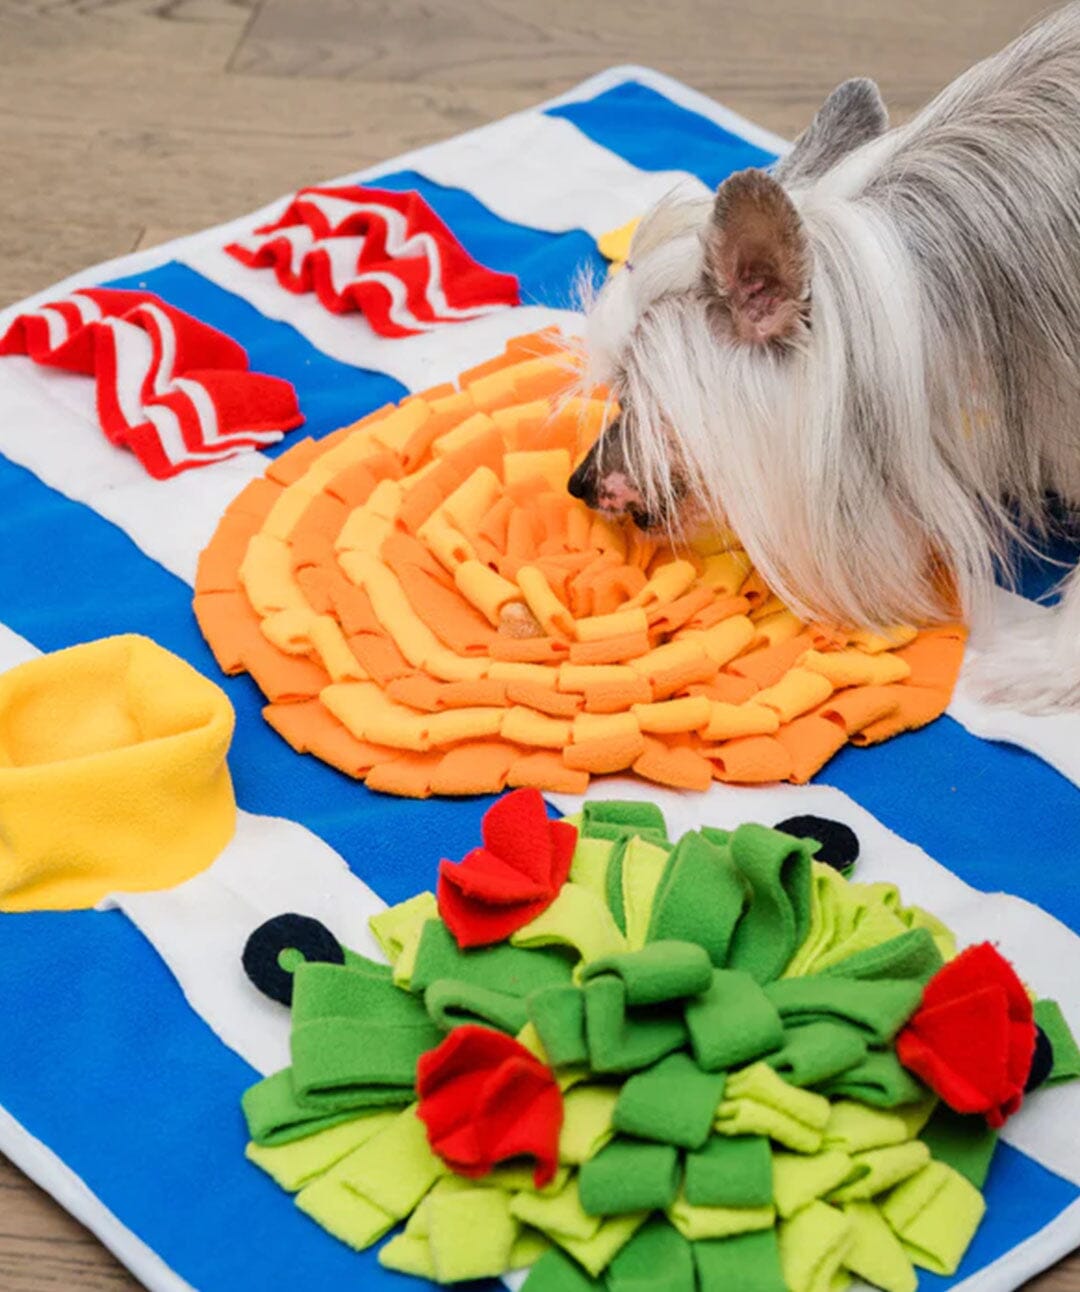 Pet Life A Sniffer Snack Interactive Feeding Pet Snuffle Mat